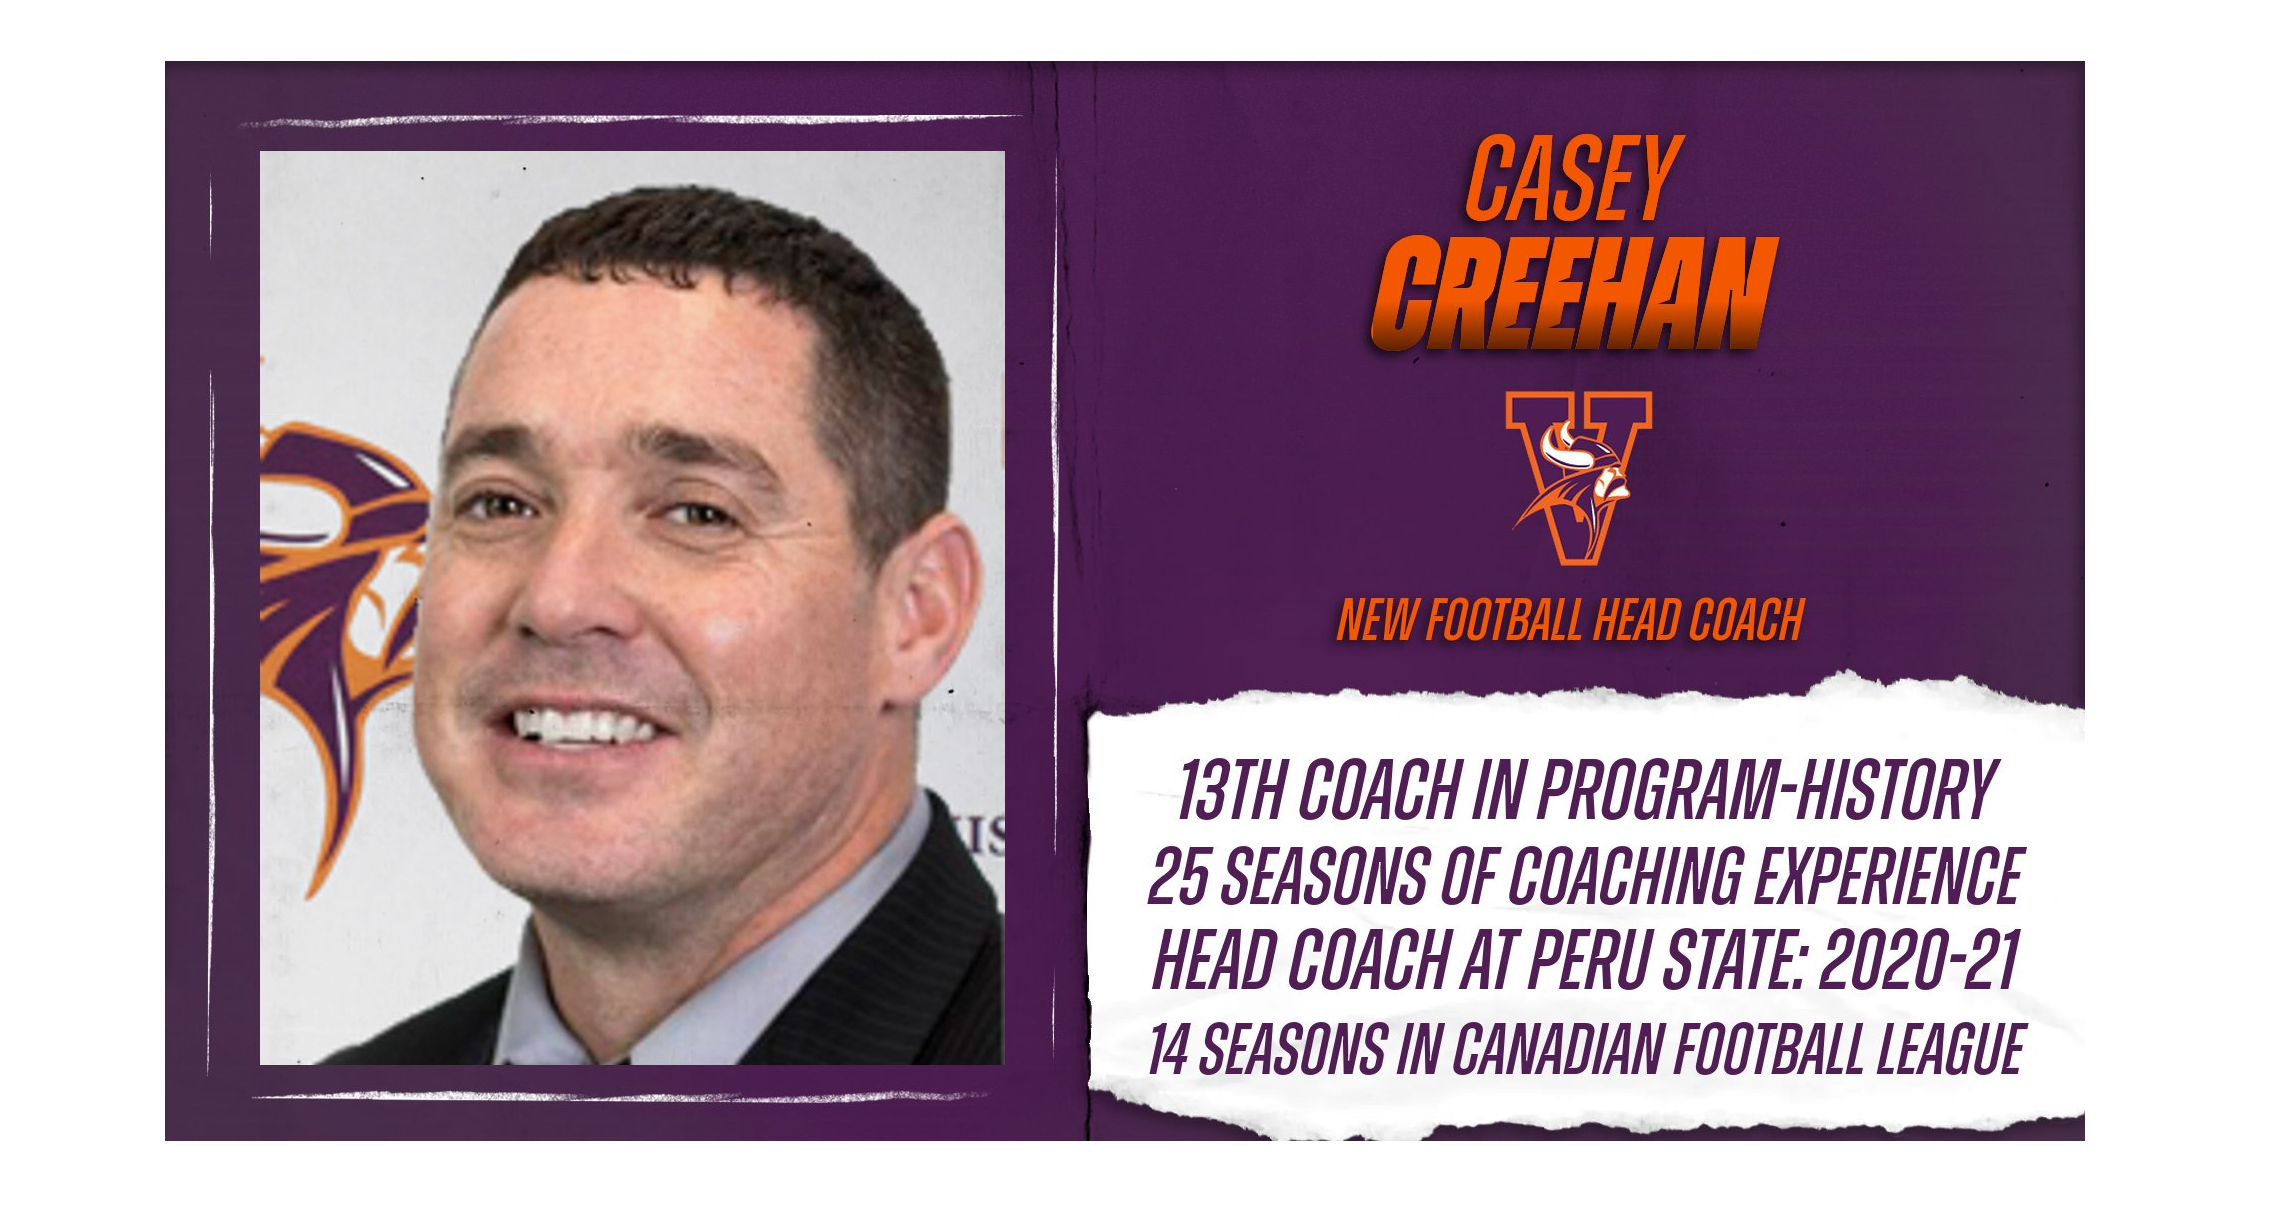 Casey Creehan Hired As New Football Head Coach